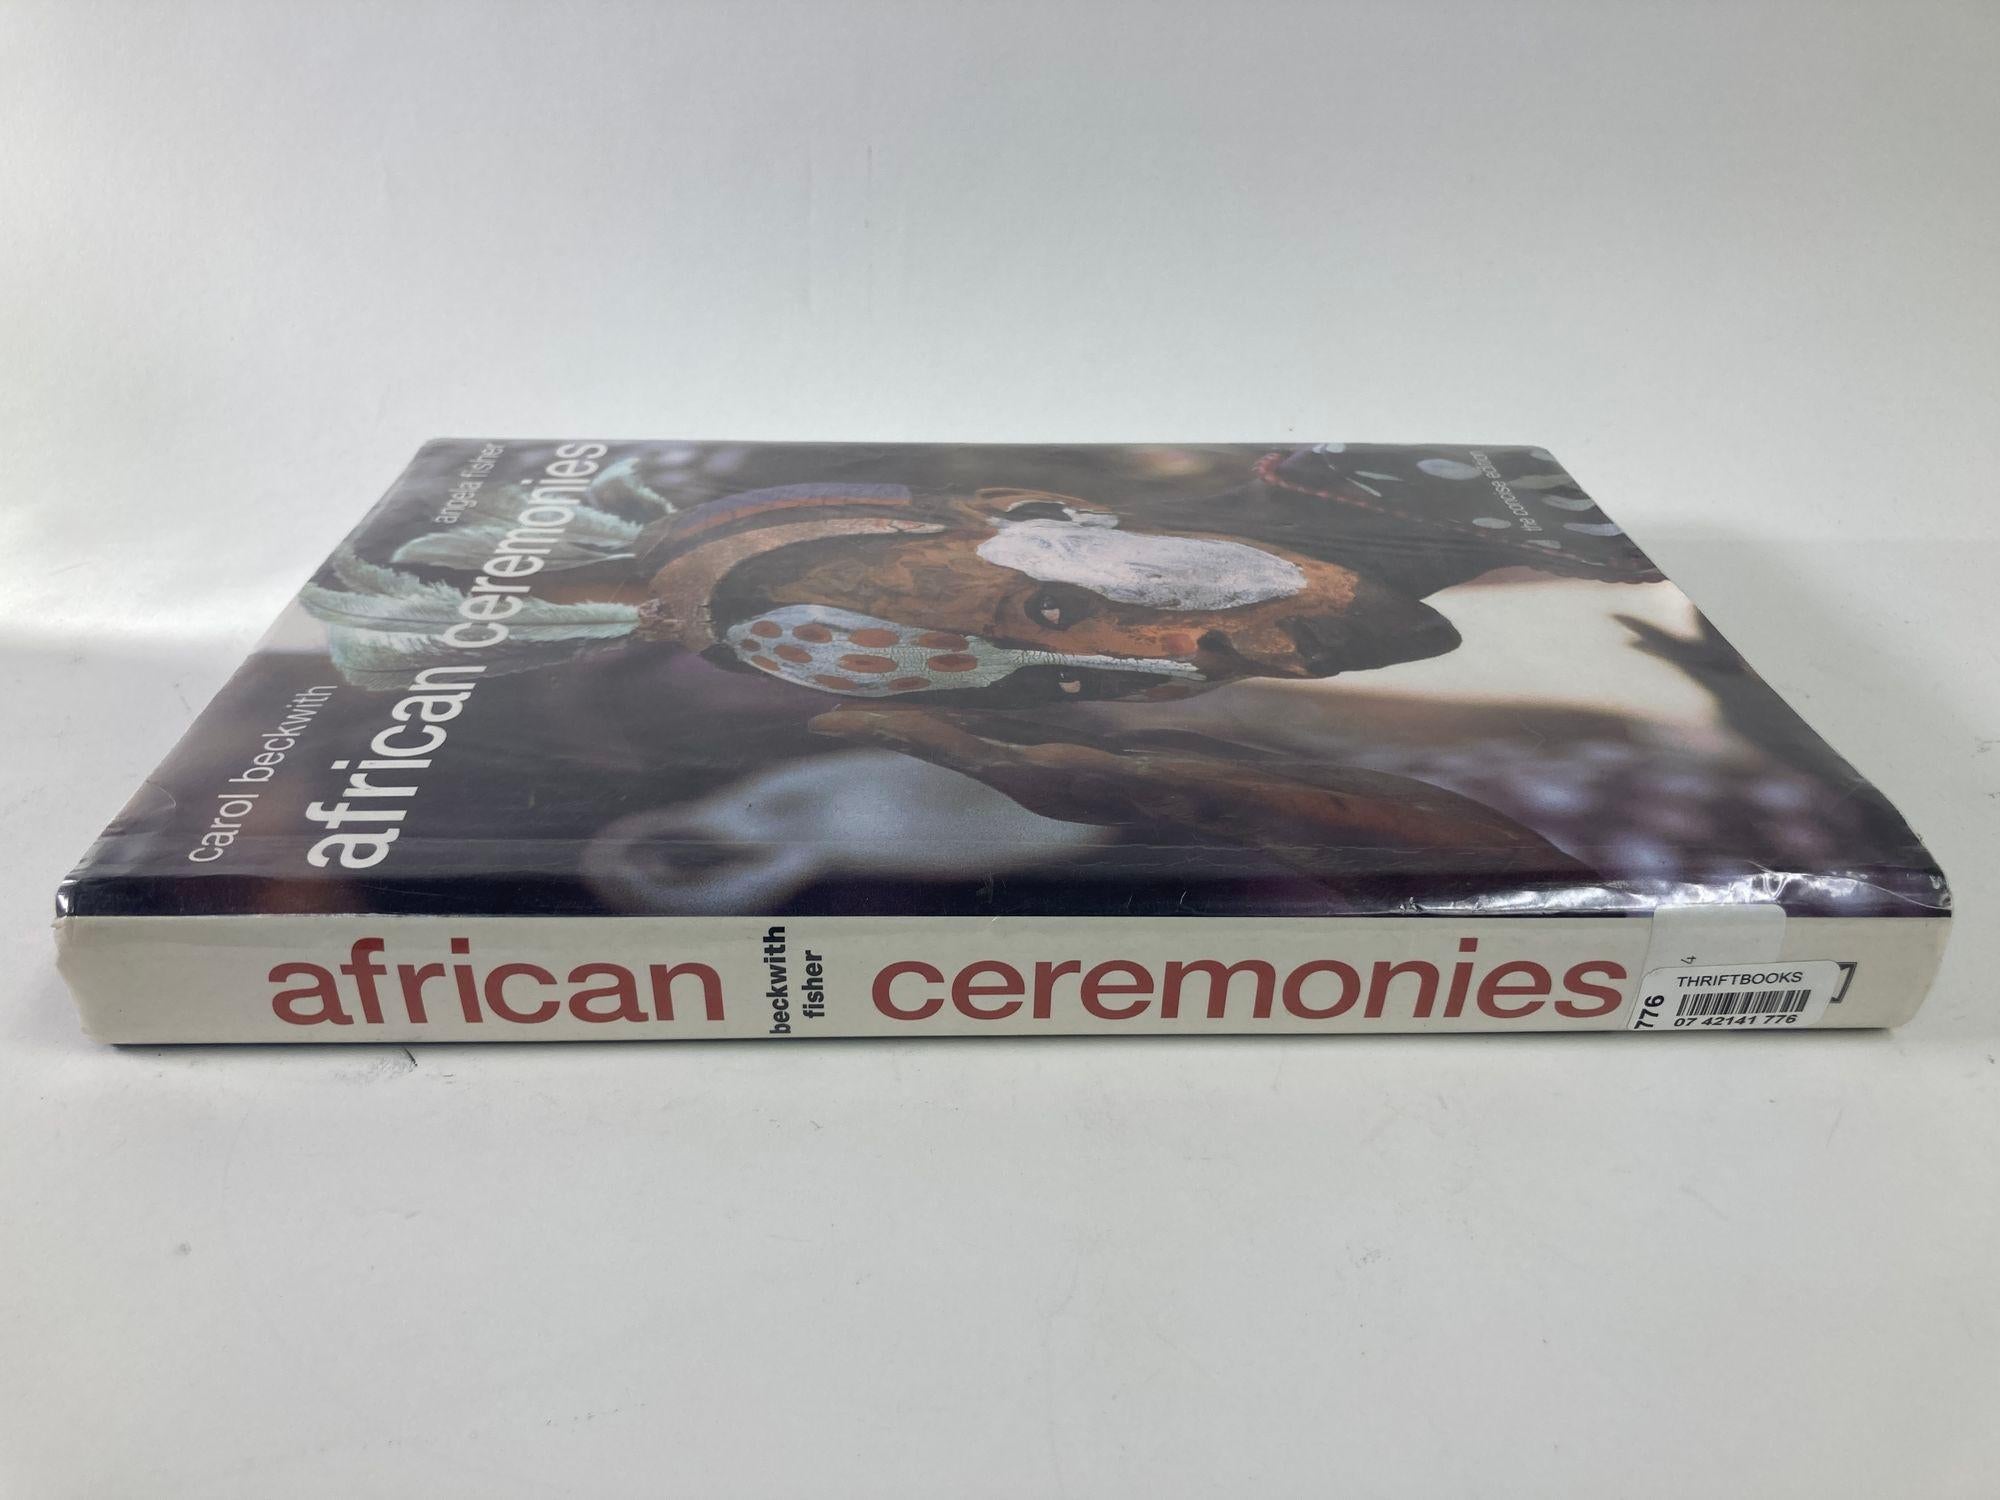 African Ceremonies by Carol Beckwith and Angela Fisher large heavy coffee table book with great images.
This book is amazing because the authors were dedicated to preserving the traditions. Some of which are pretty shocking to the western world. The